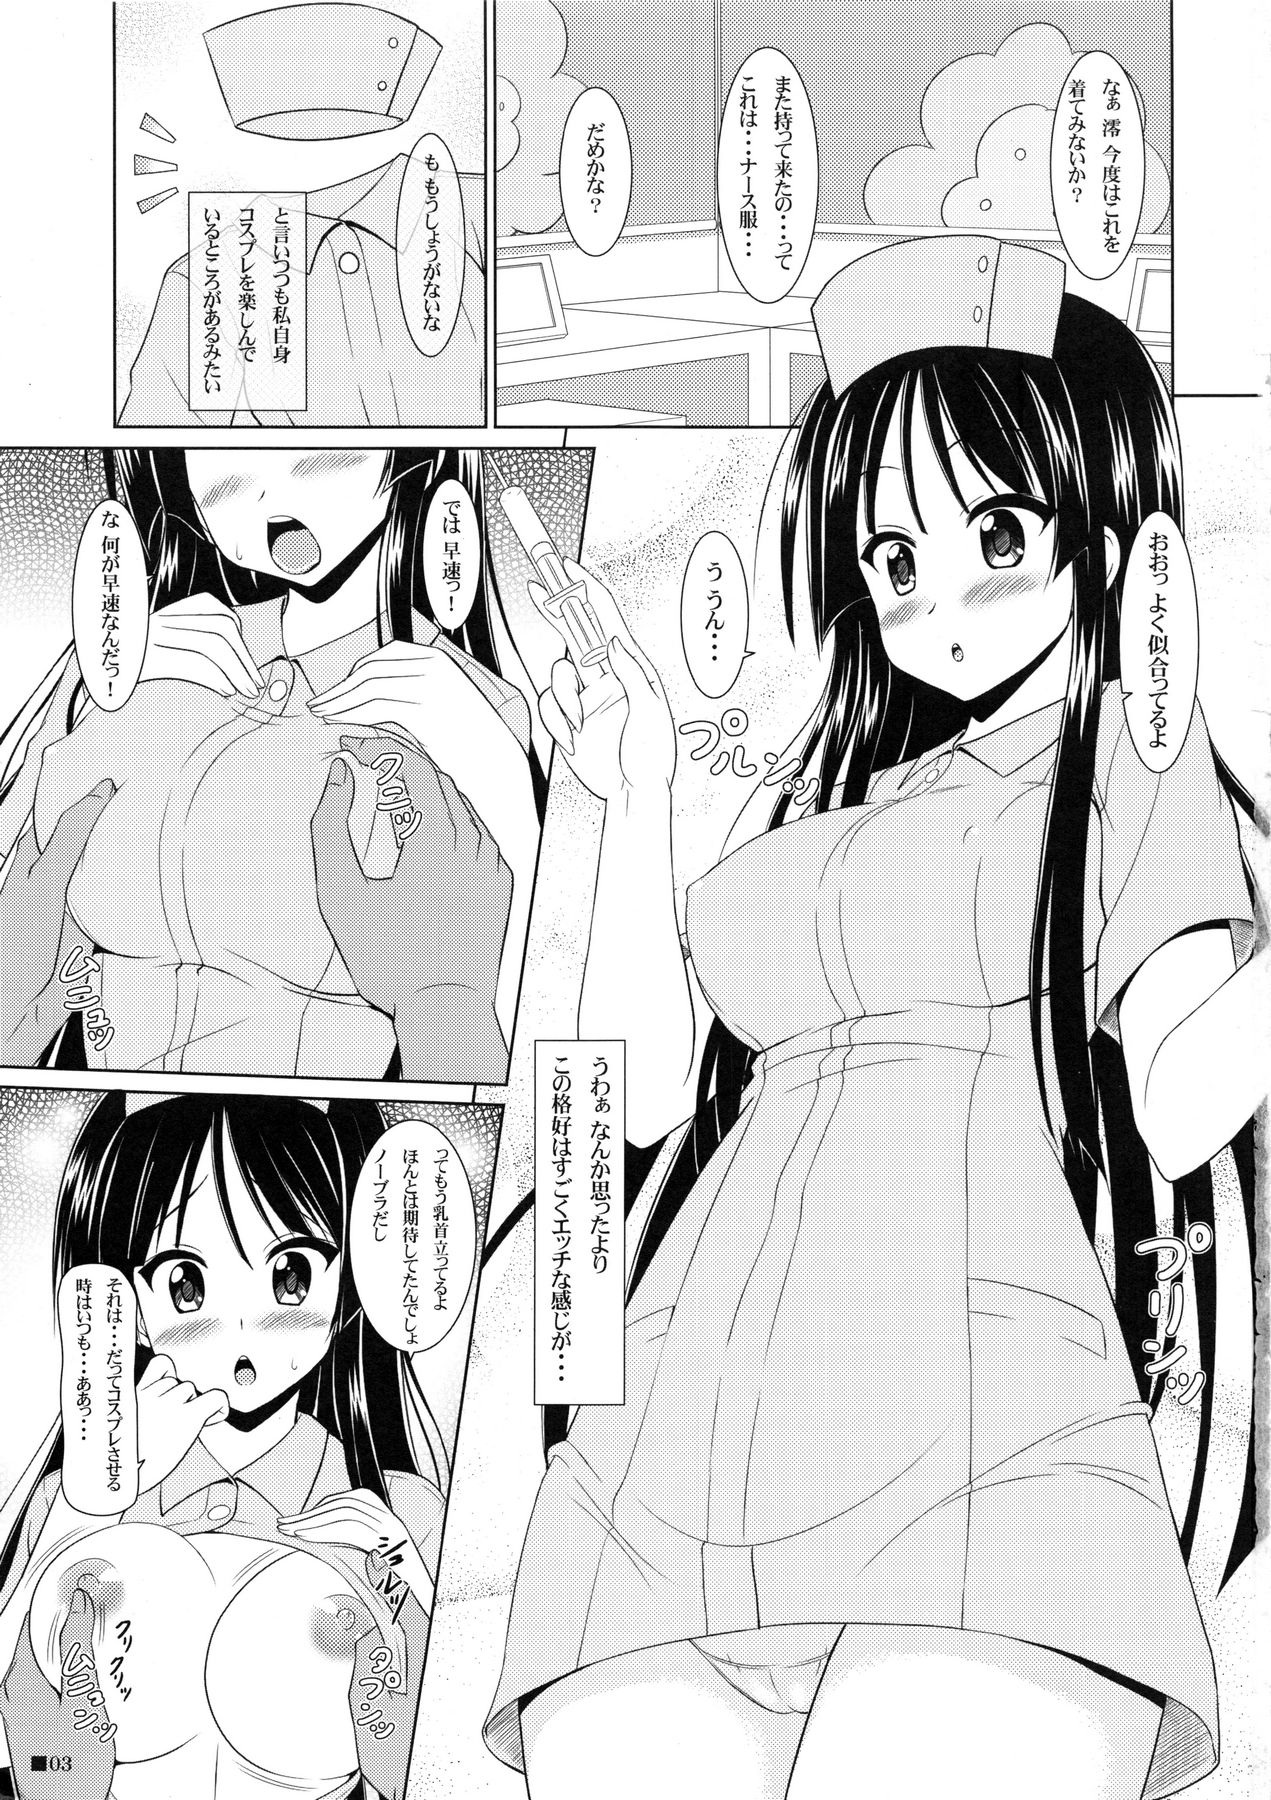 (C80) [Turning Point (Uehiro)] Mio-chan Switch! (K-ON!) page 2 full